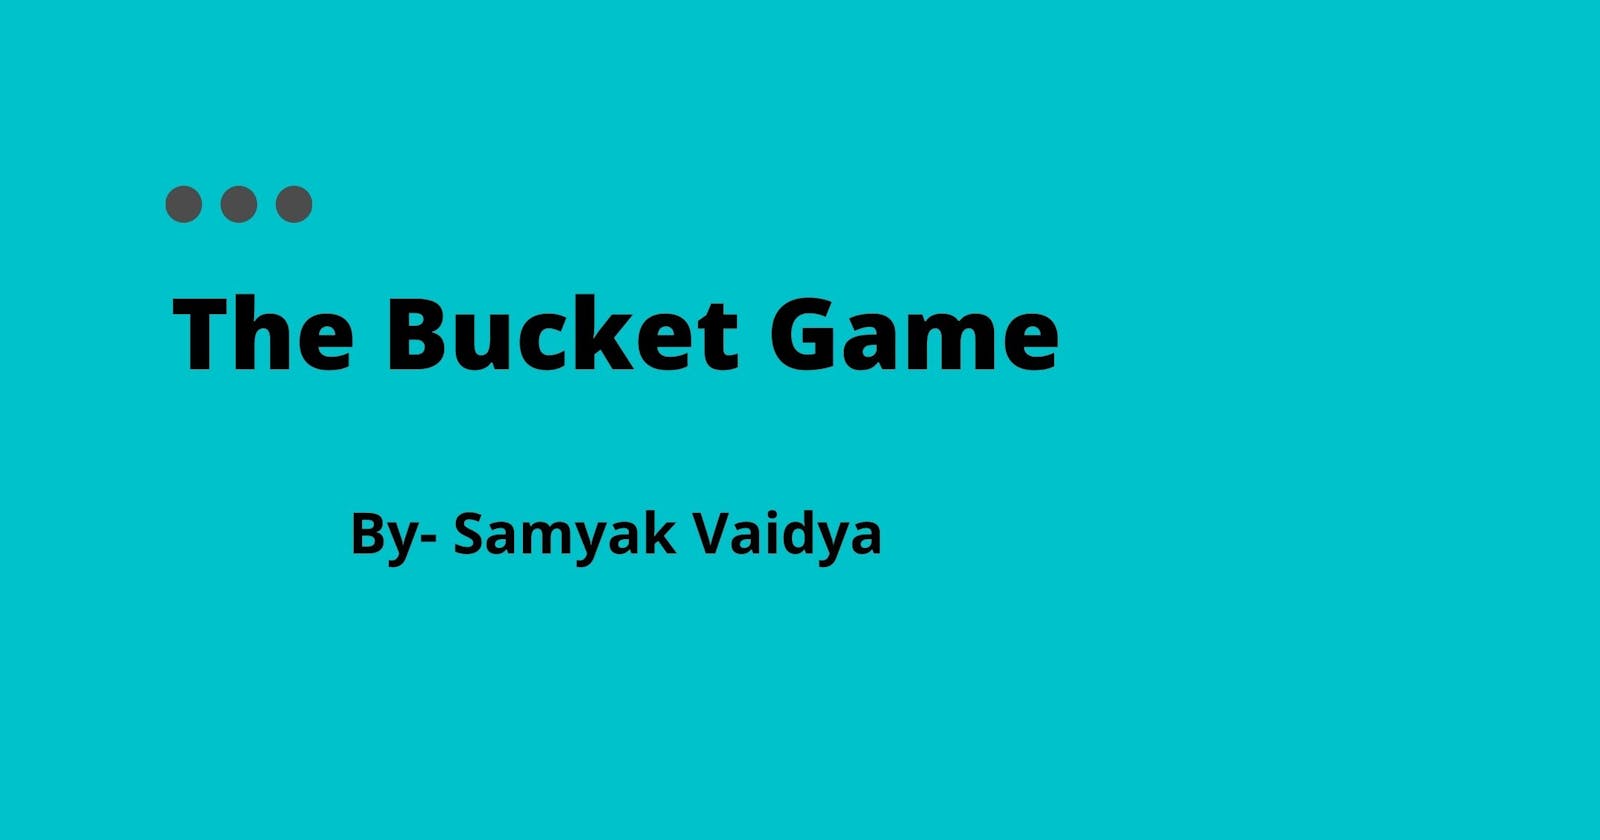 Creating The Bucket Game